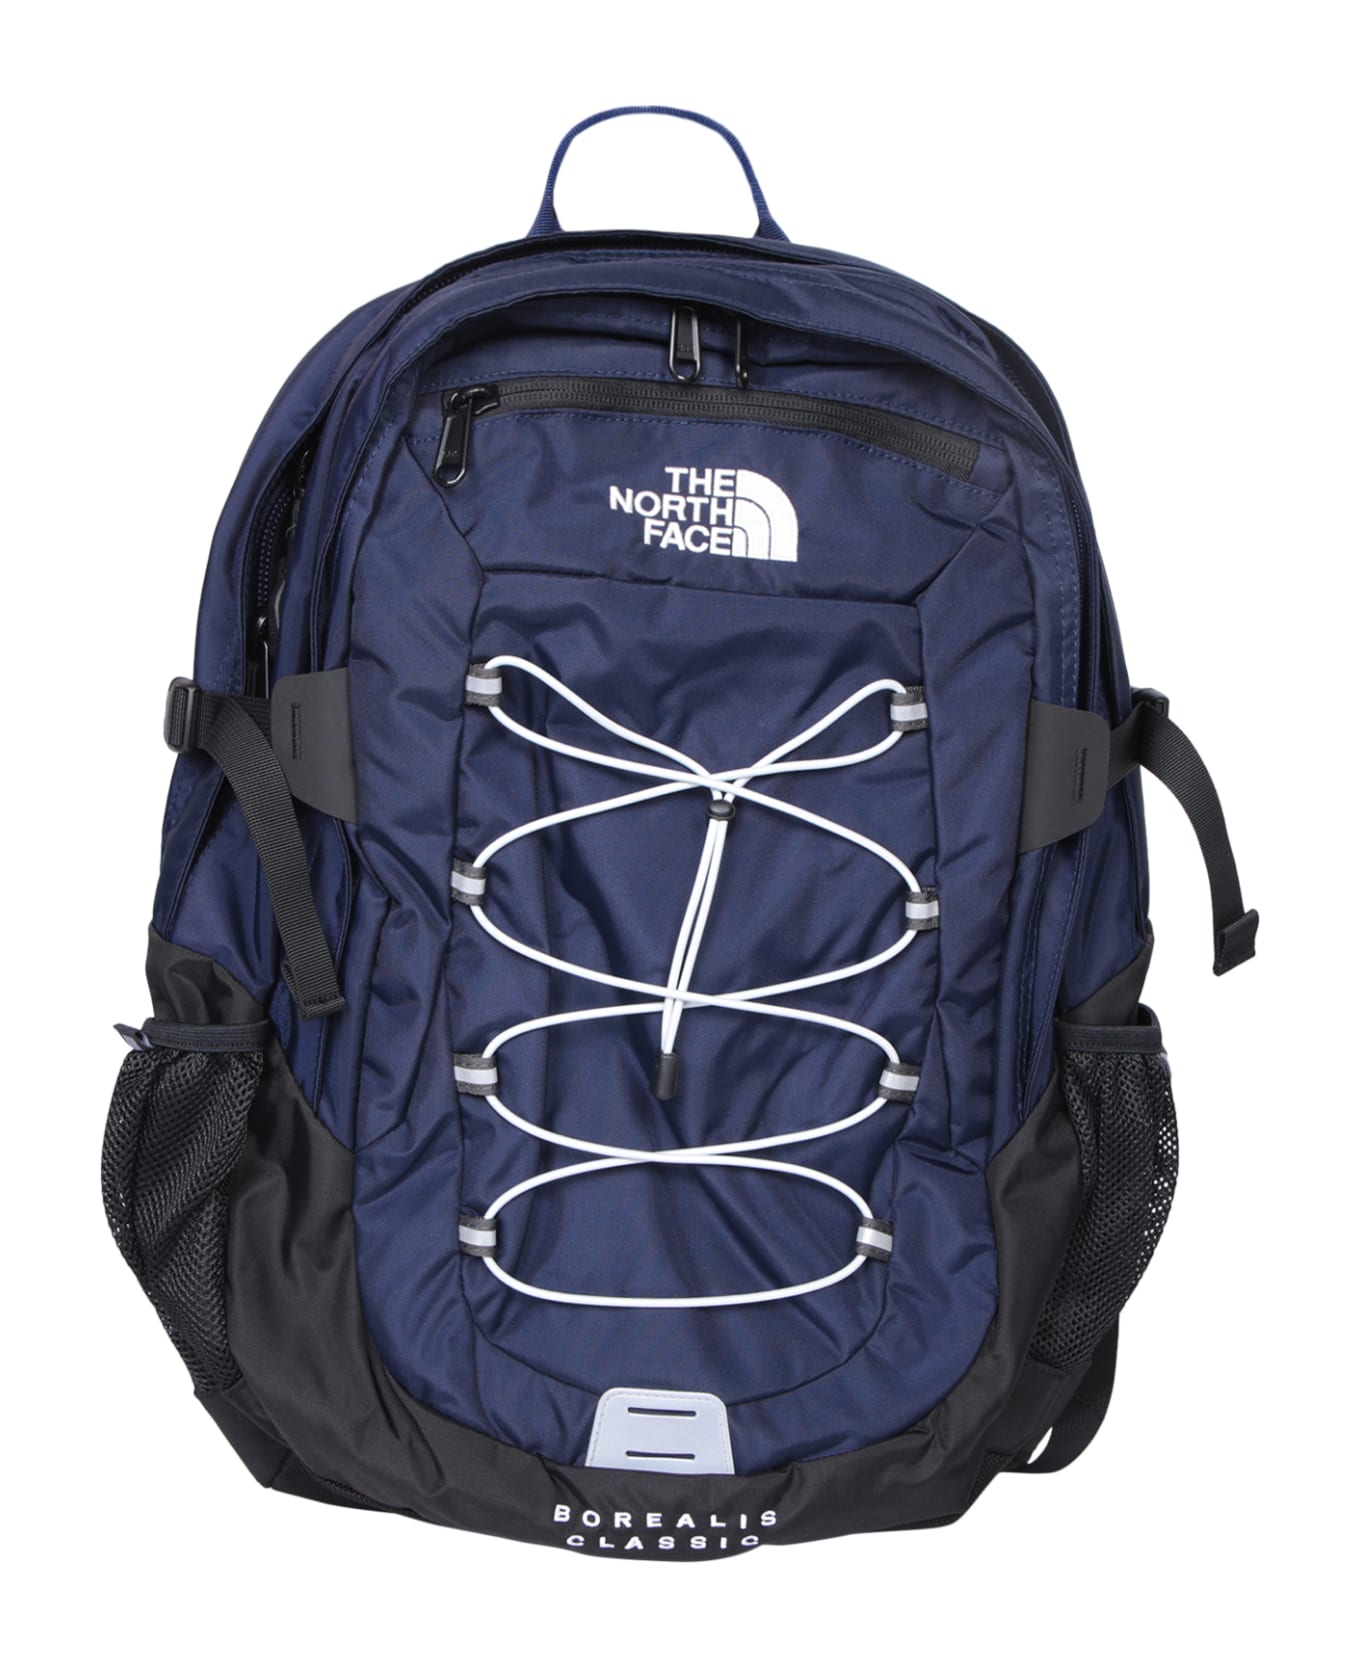 The North Face Borealis Blue Backpack - Blue バックパック